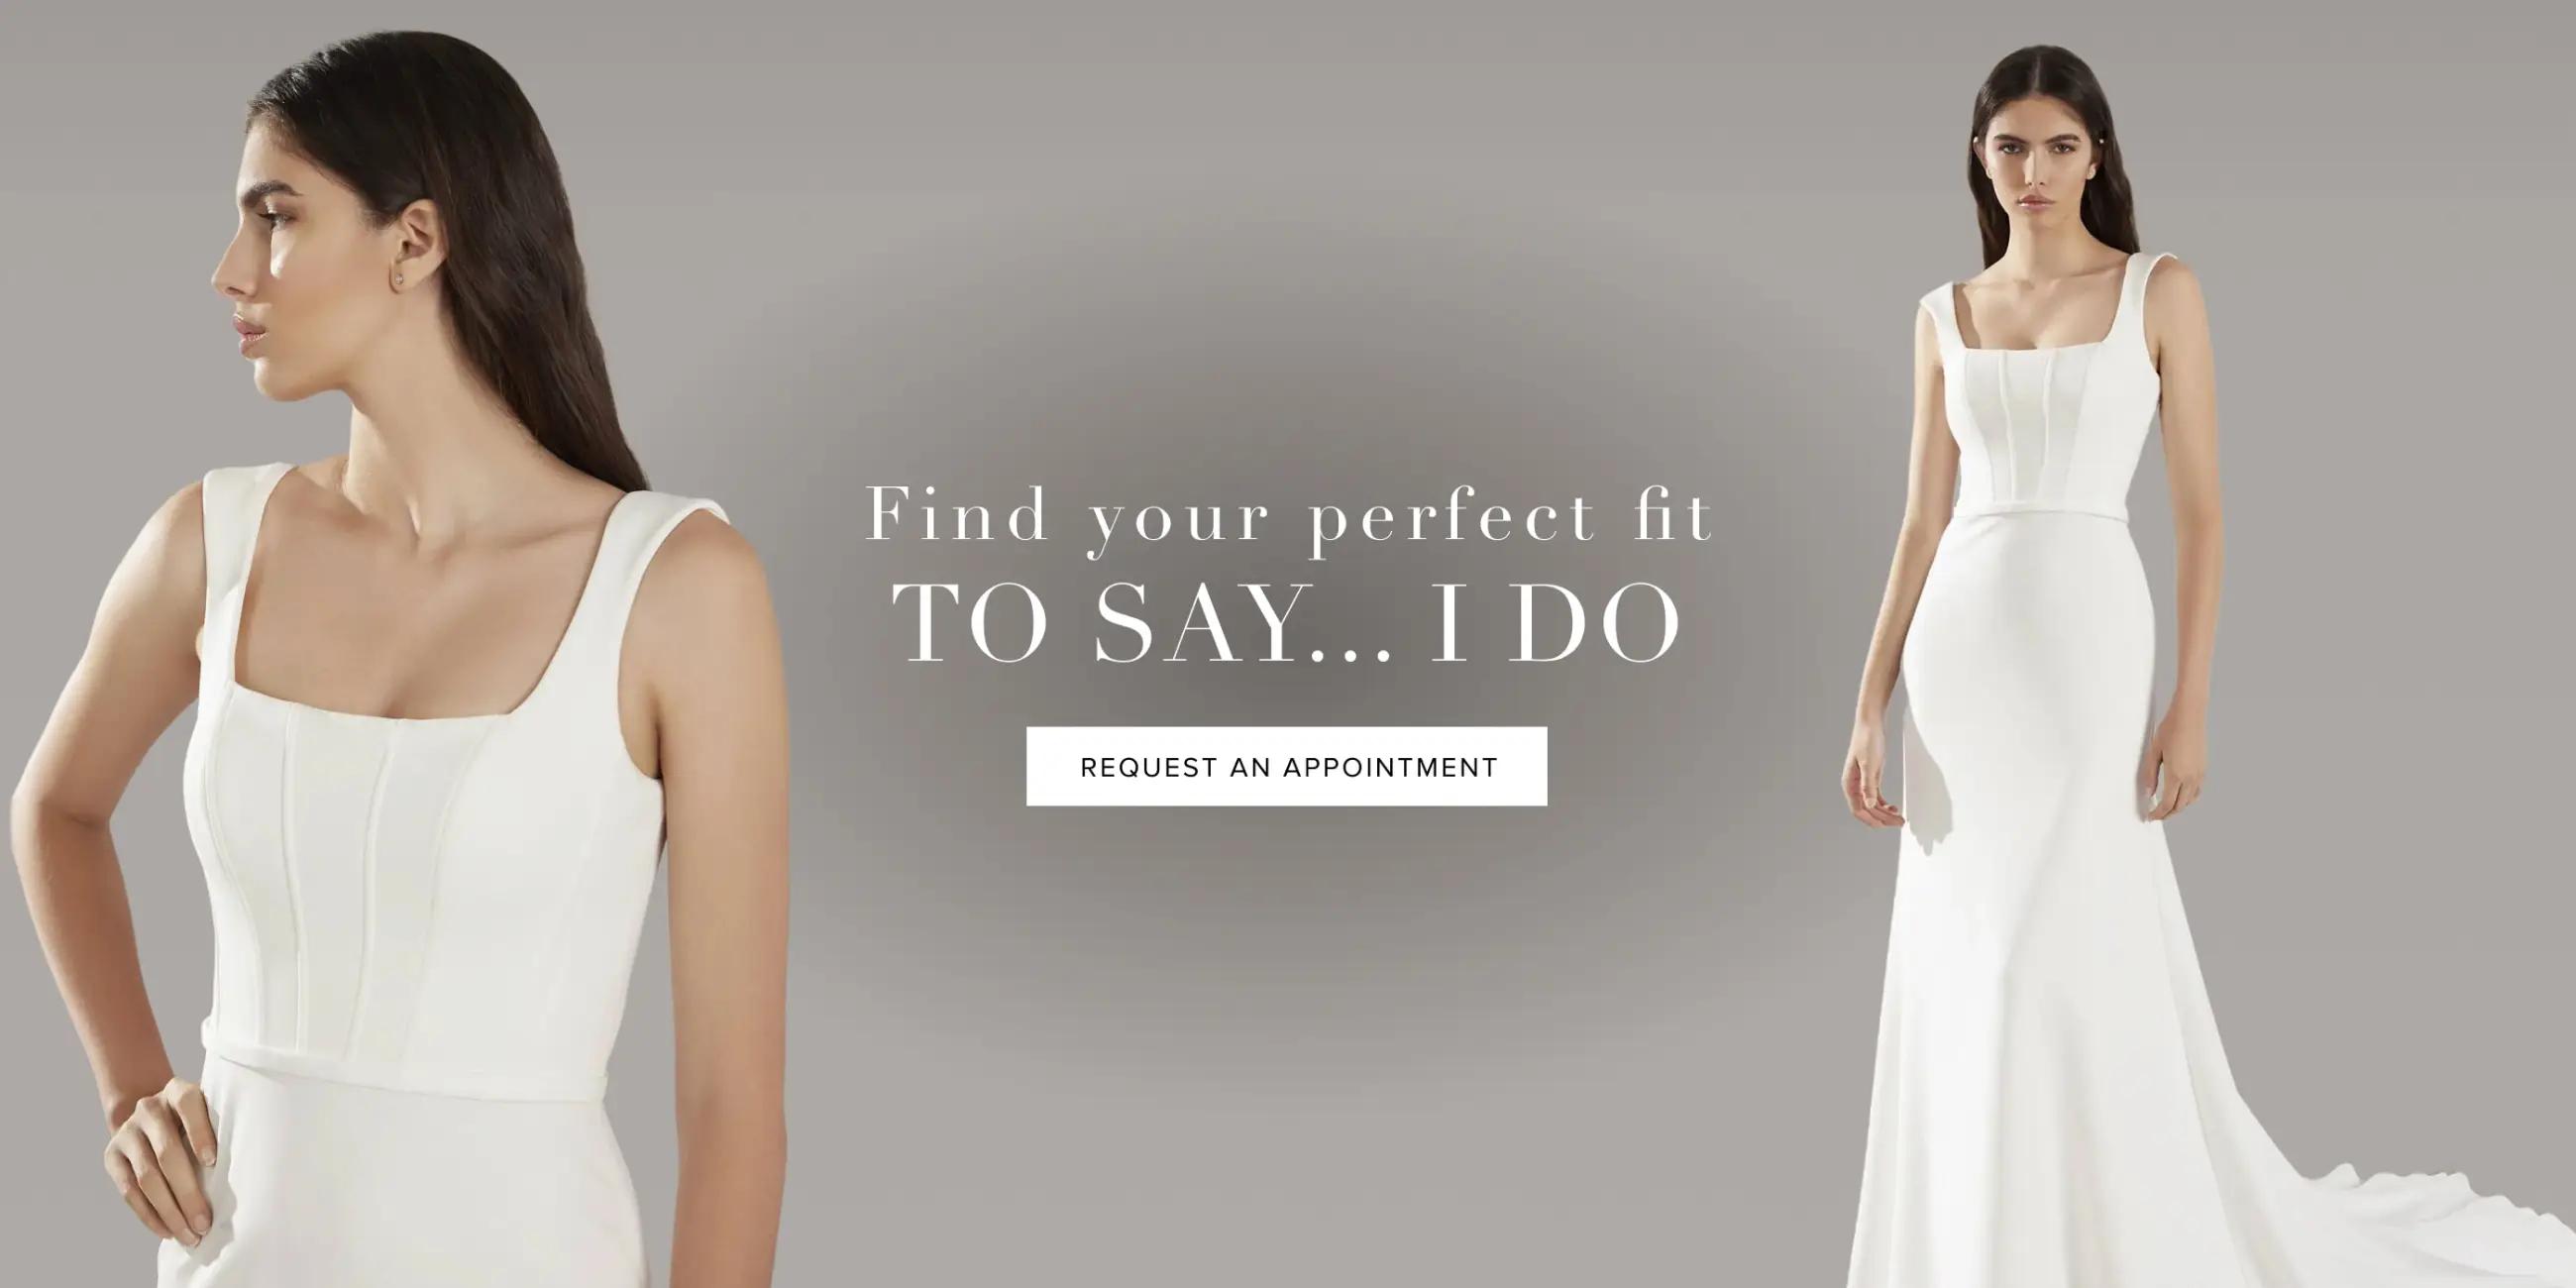 Find your perfect fit to say, I Do. Desktop banner